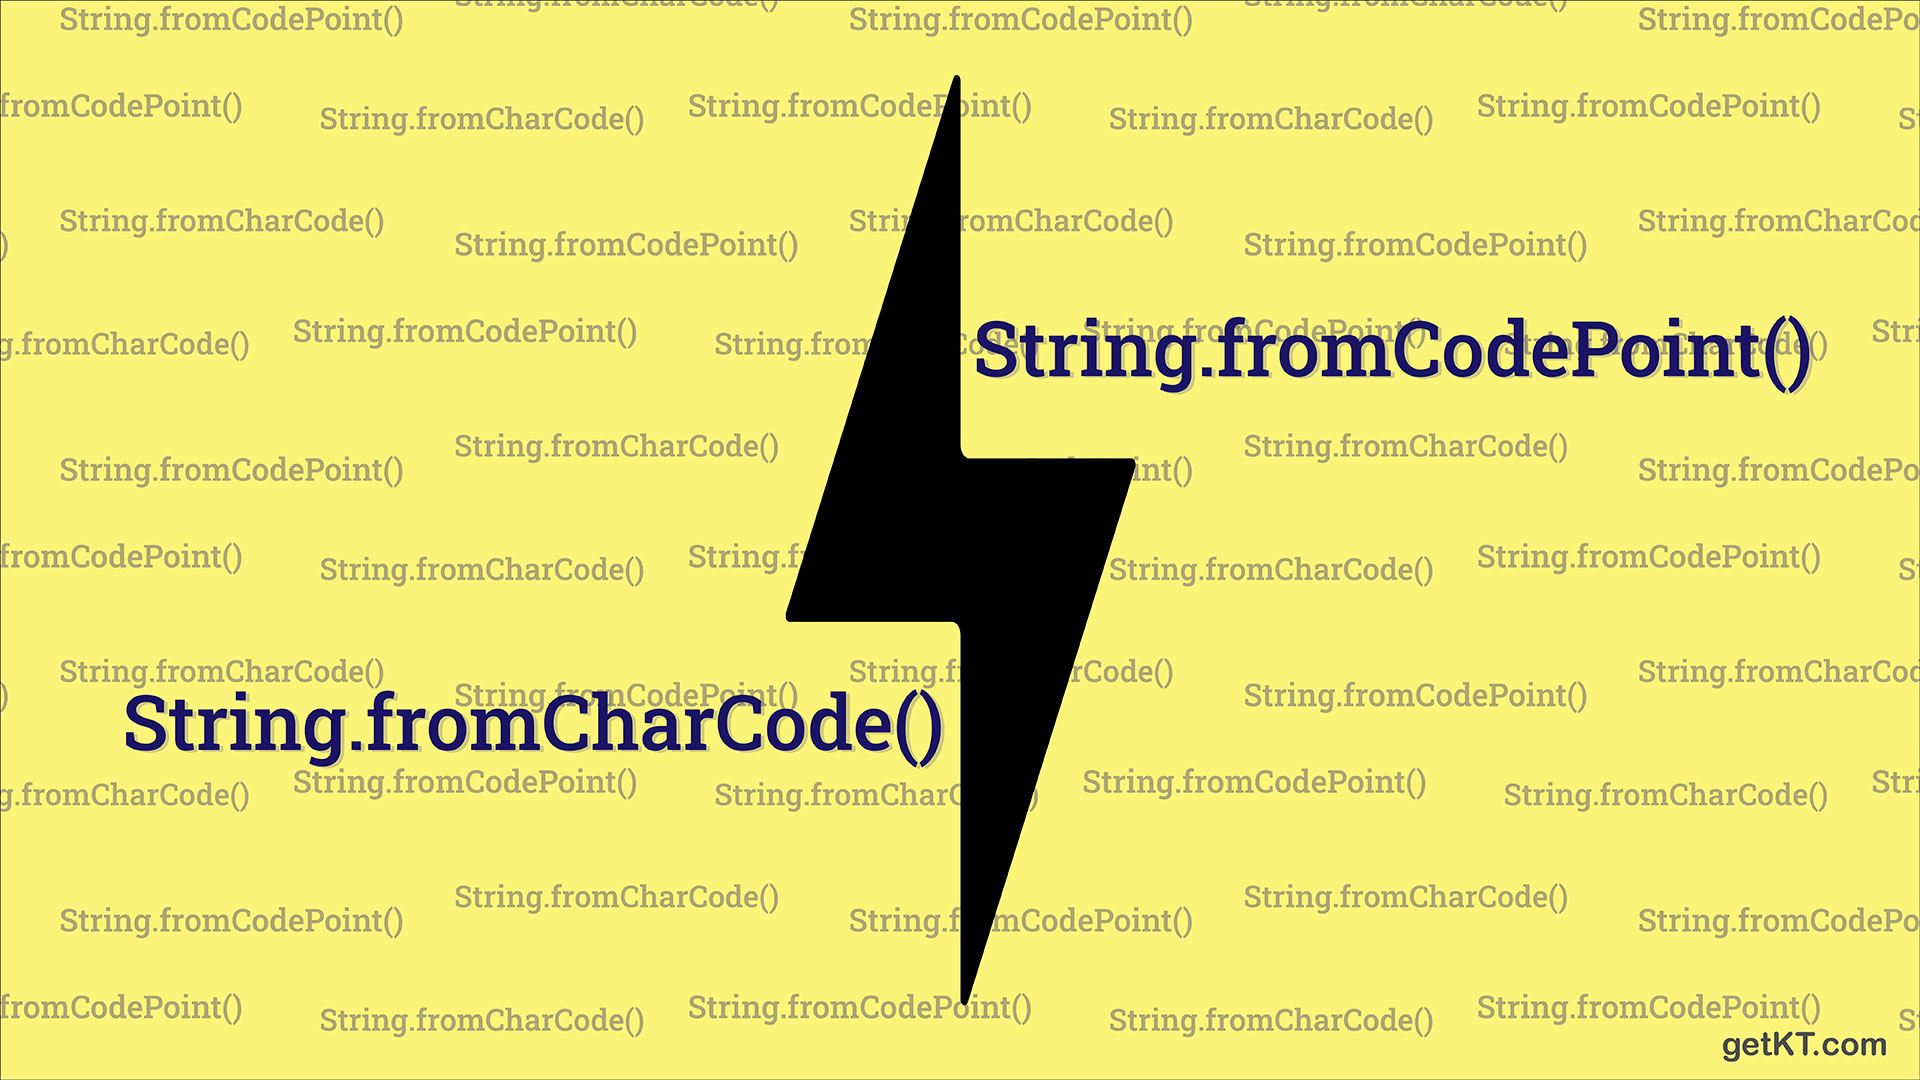 String.fromCharCode vs String.fromCodePoint